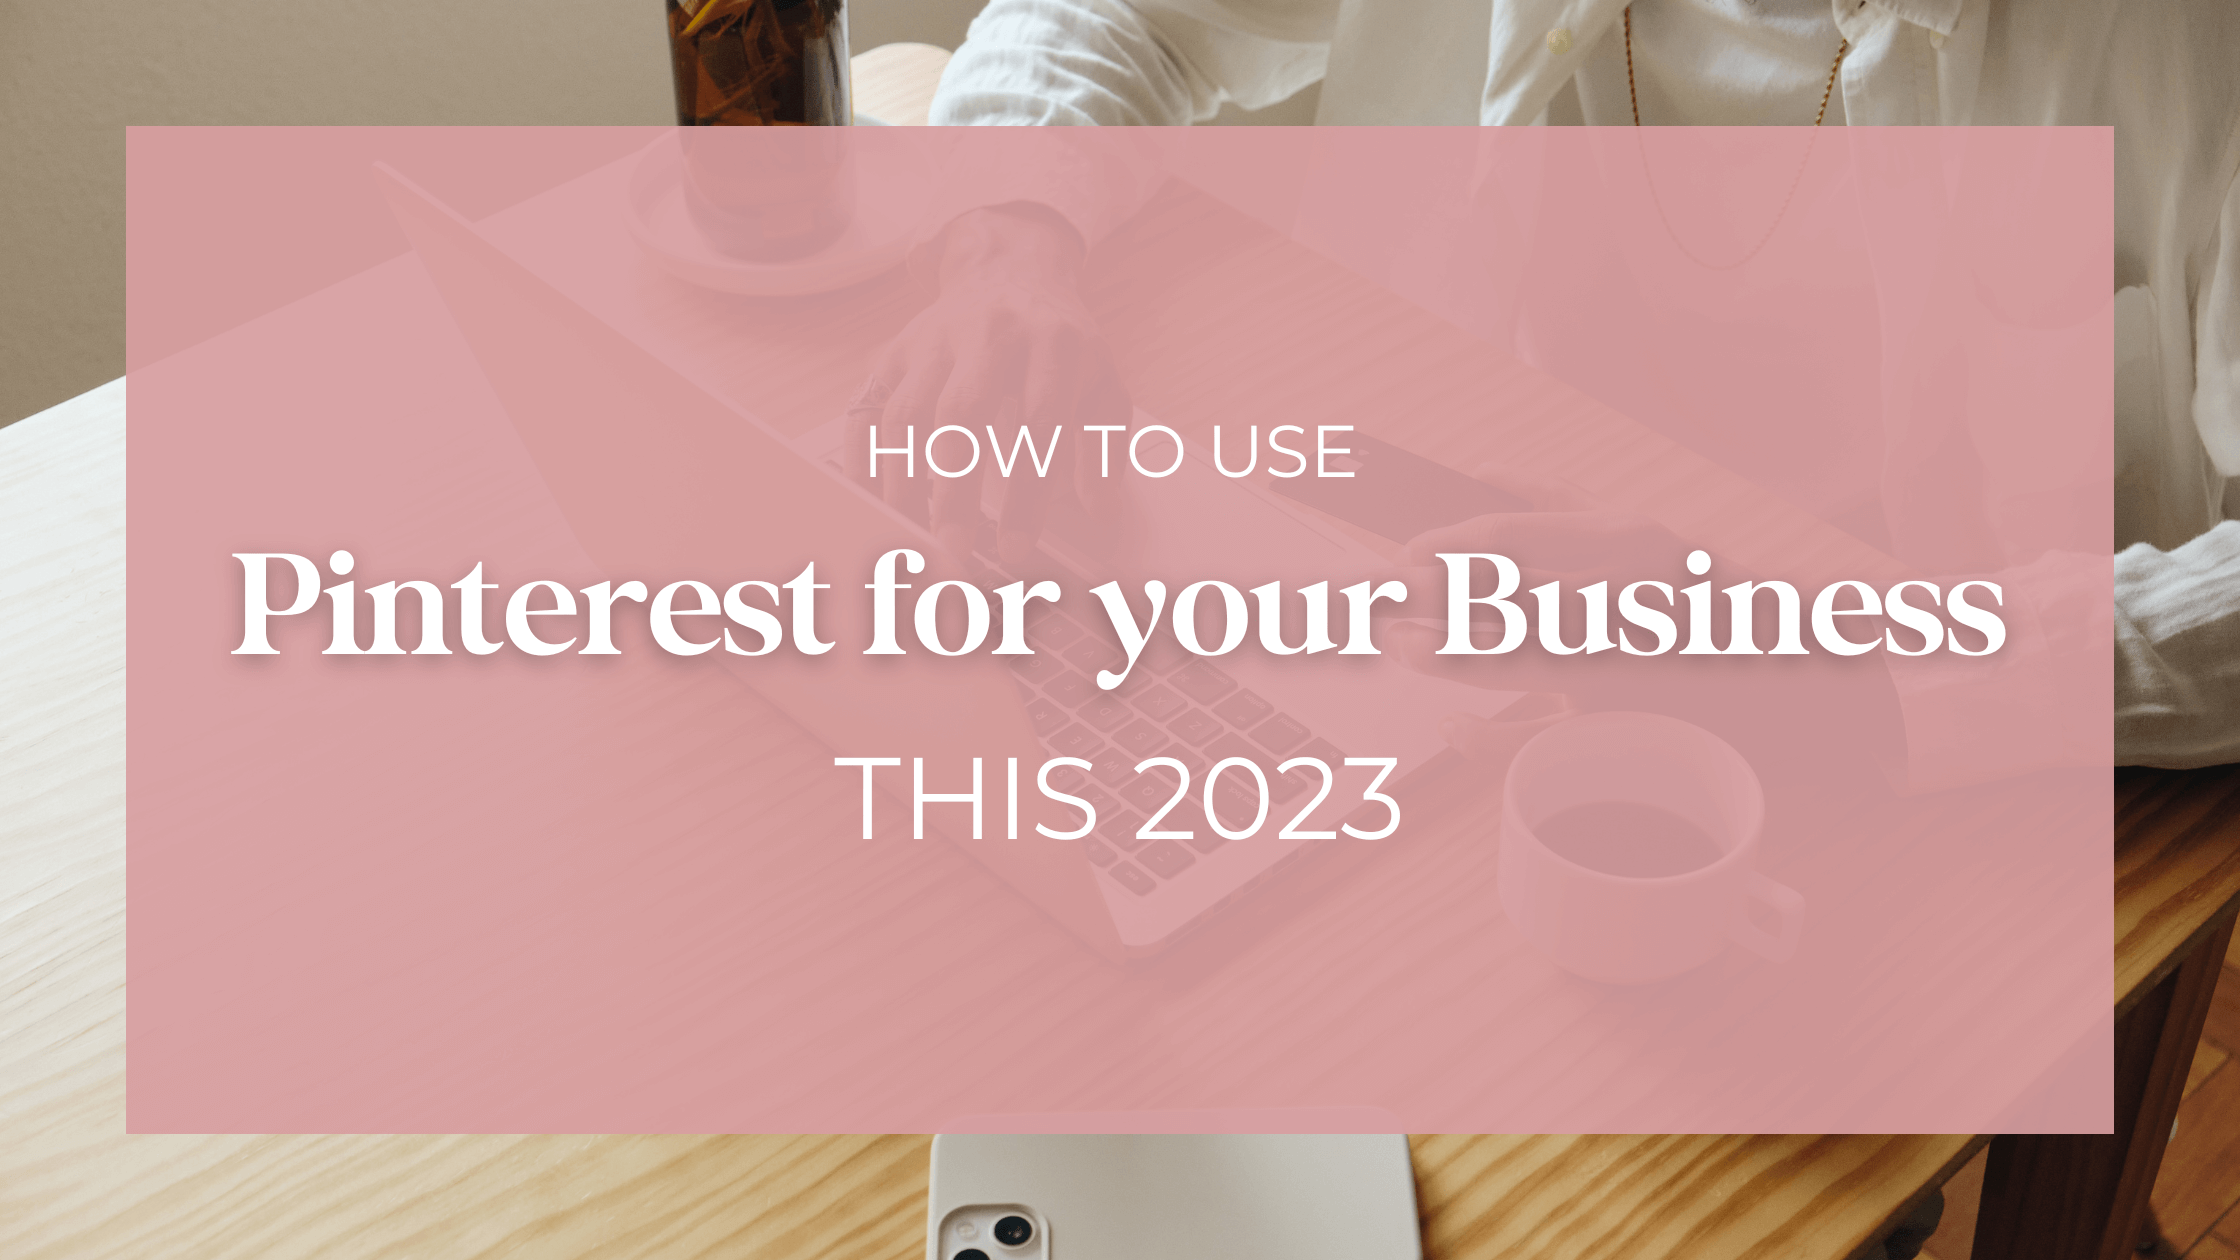 text overlay - how to use pinterest for your business 2023